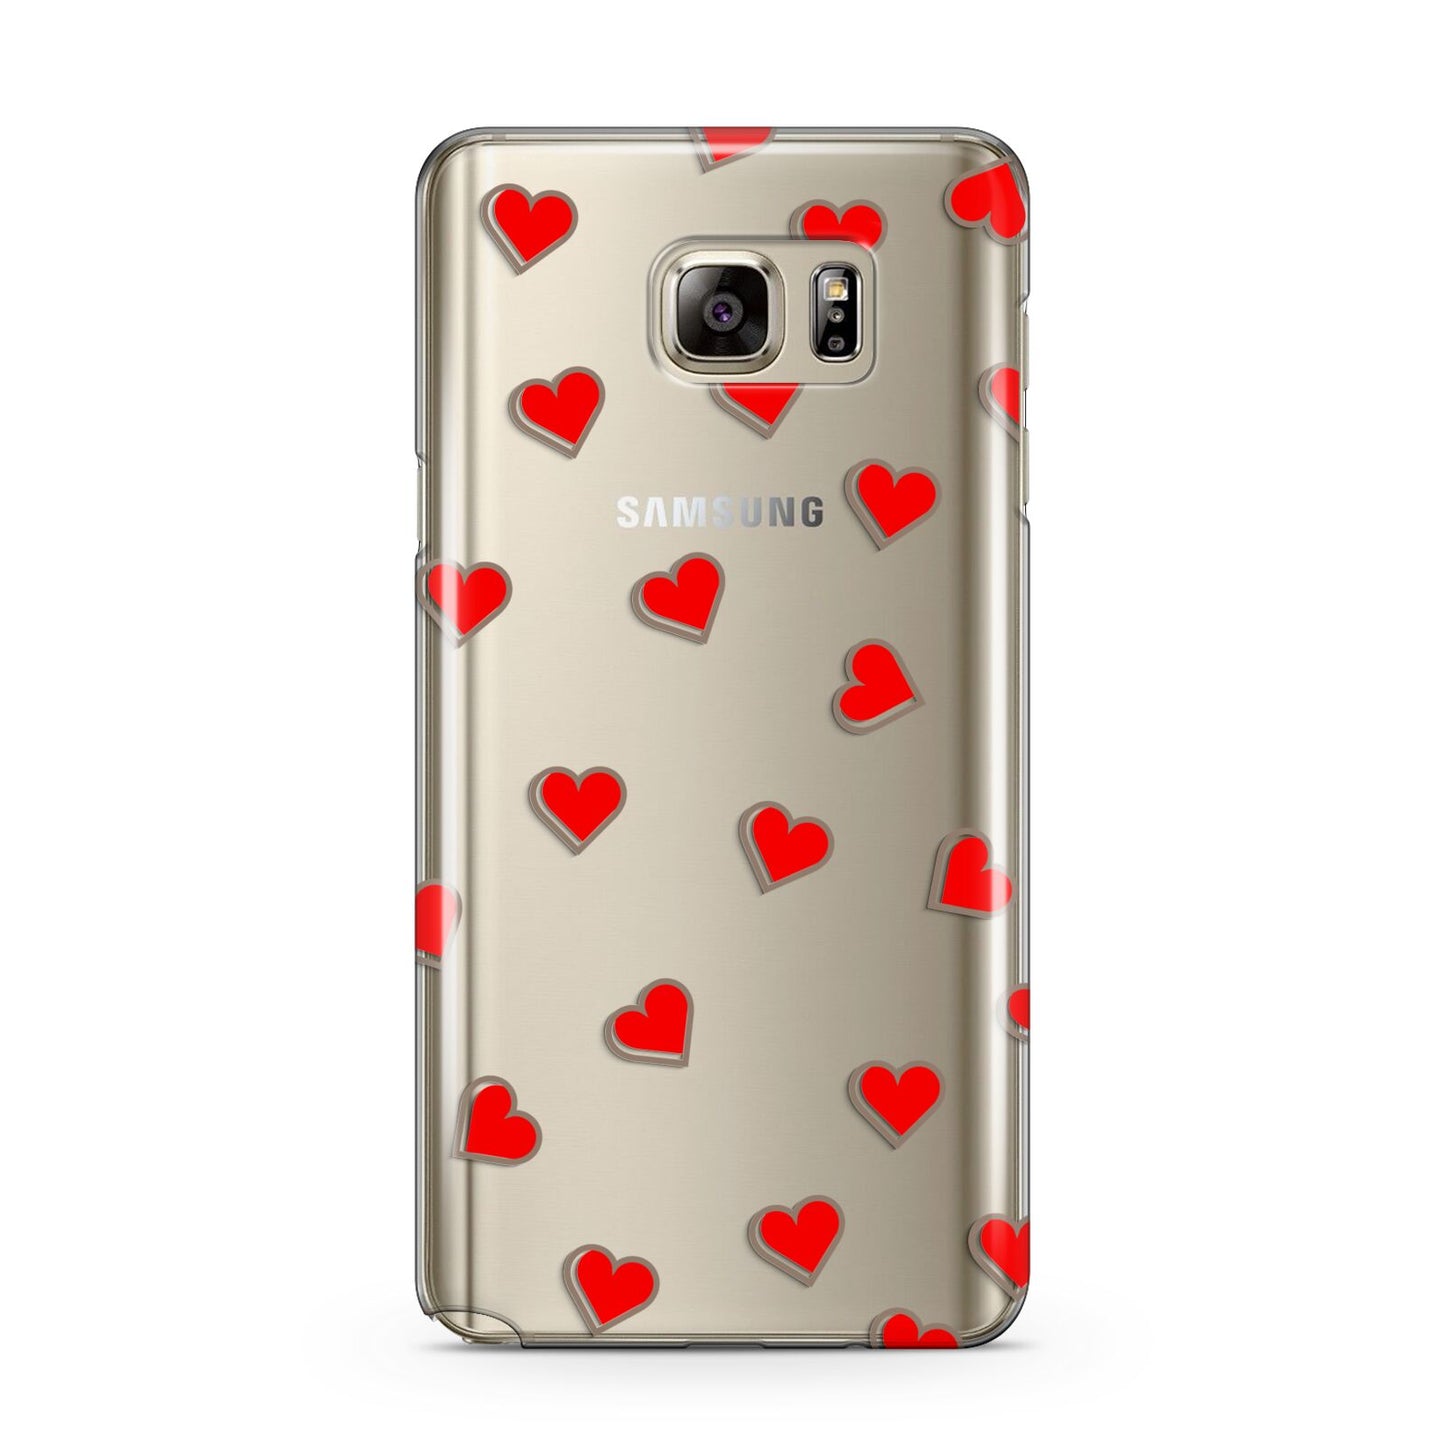 Cute Red Hearts Samsung Galaxy Note 5 Case